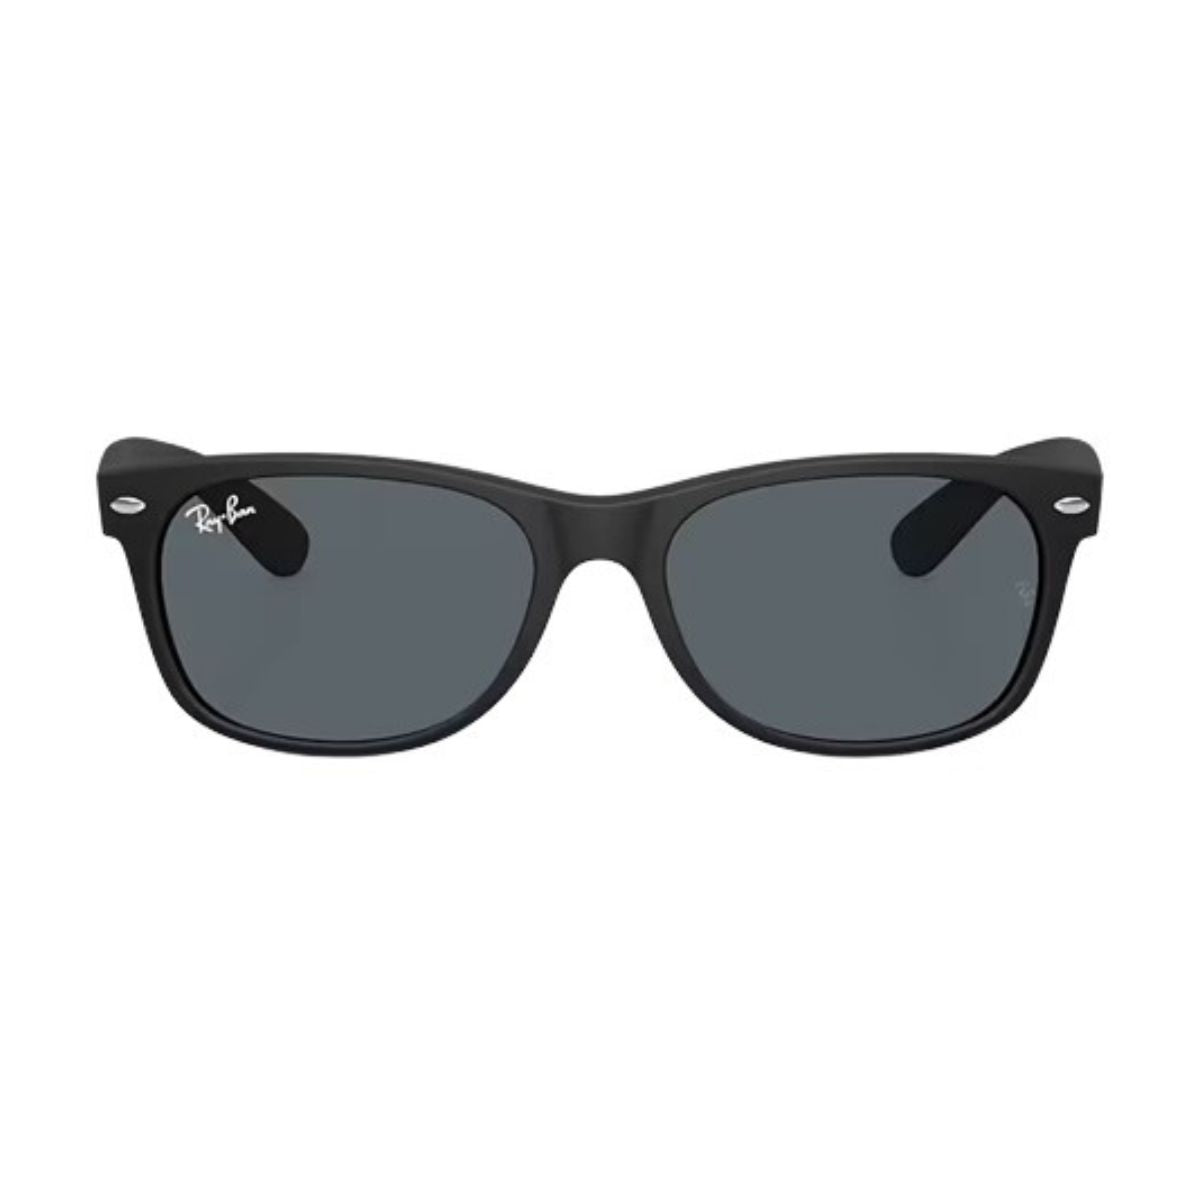 "Buy Ray Ban  2132 622/R5 UV Protection Sunglass For Men And Women At Optorium"